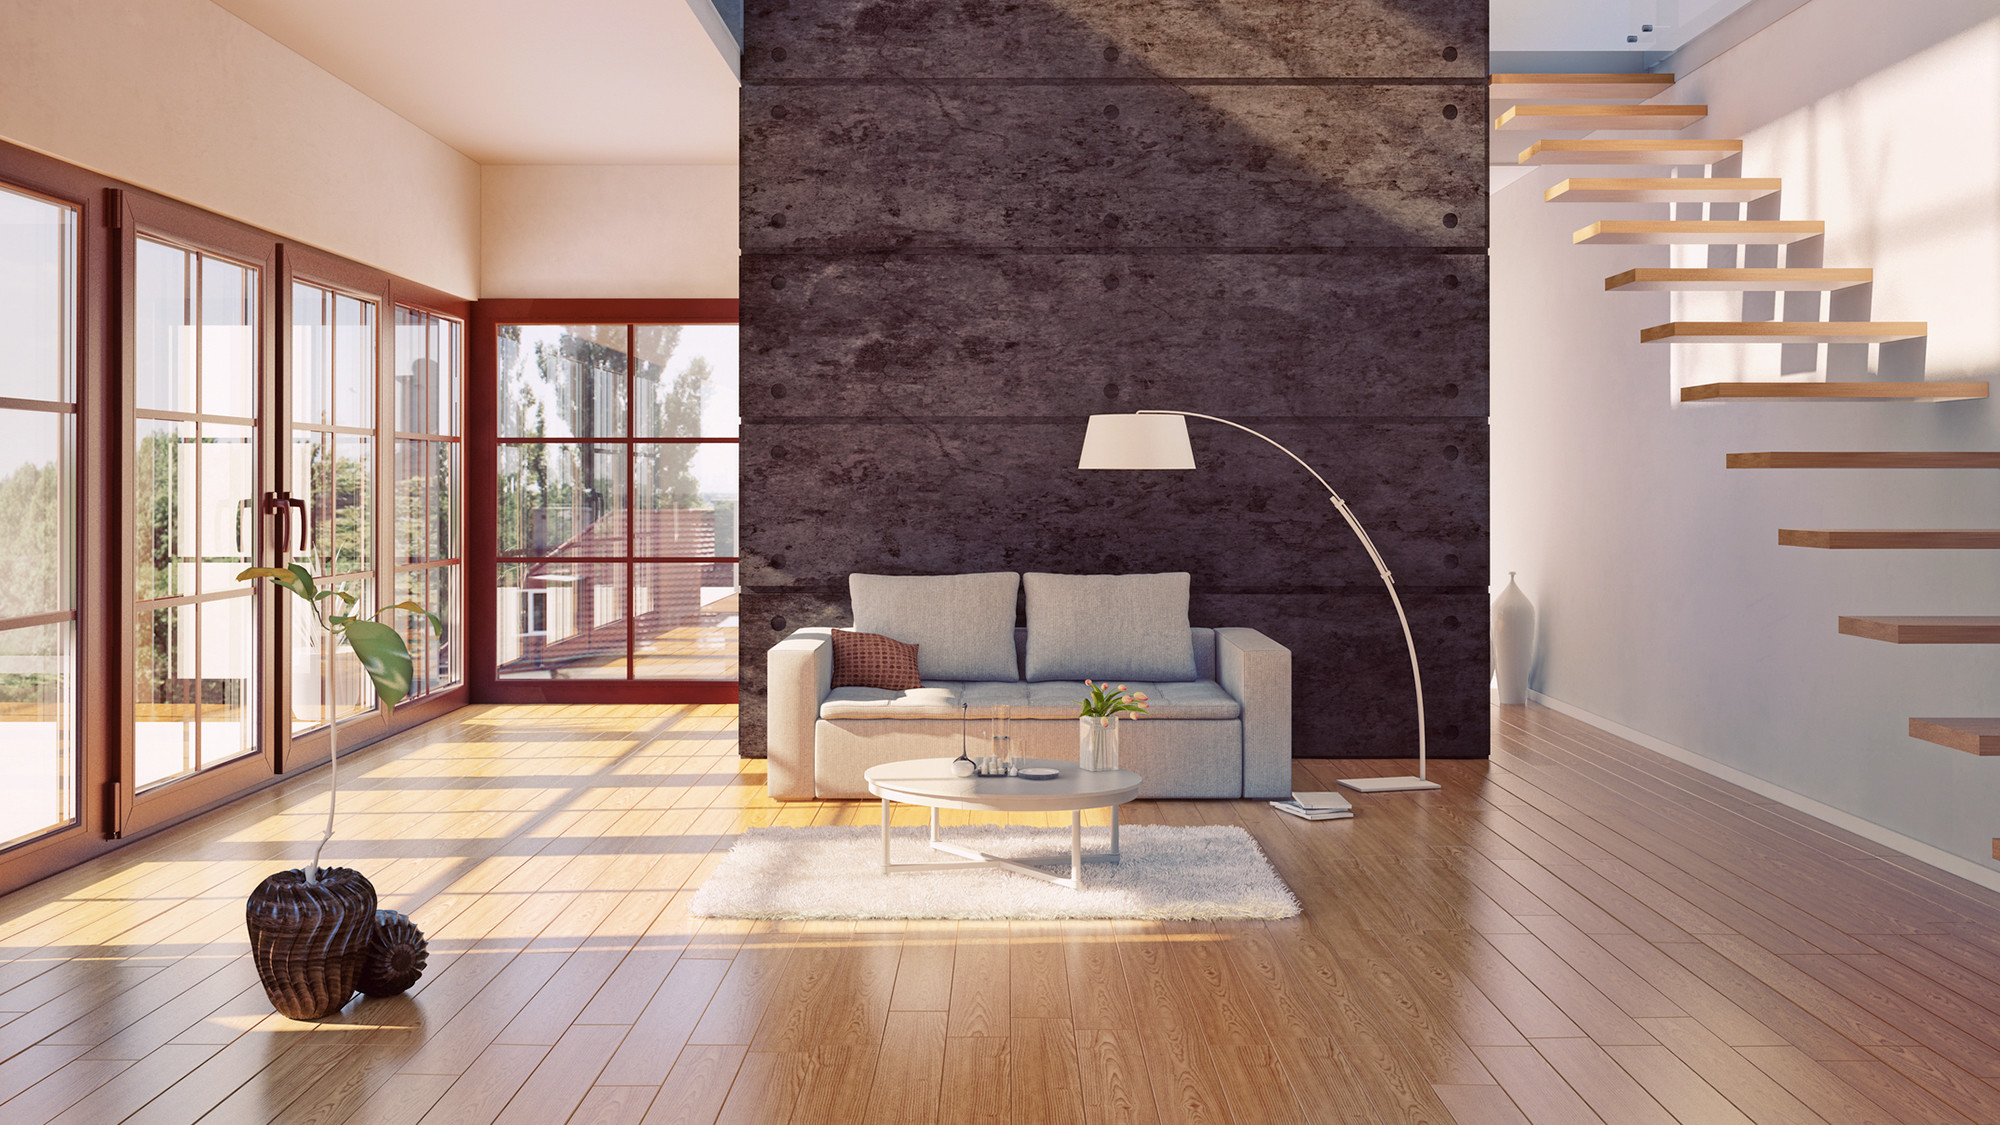 26 Stylish How Much Does It Cost to Do Hardwood Floors 2024 free download how much does it cost to do hardwood floors of do hardwood floors provide the best return on investment realtor coma pertaining to hardwood floors investment